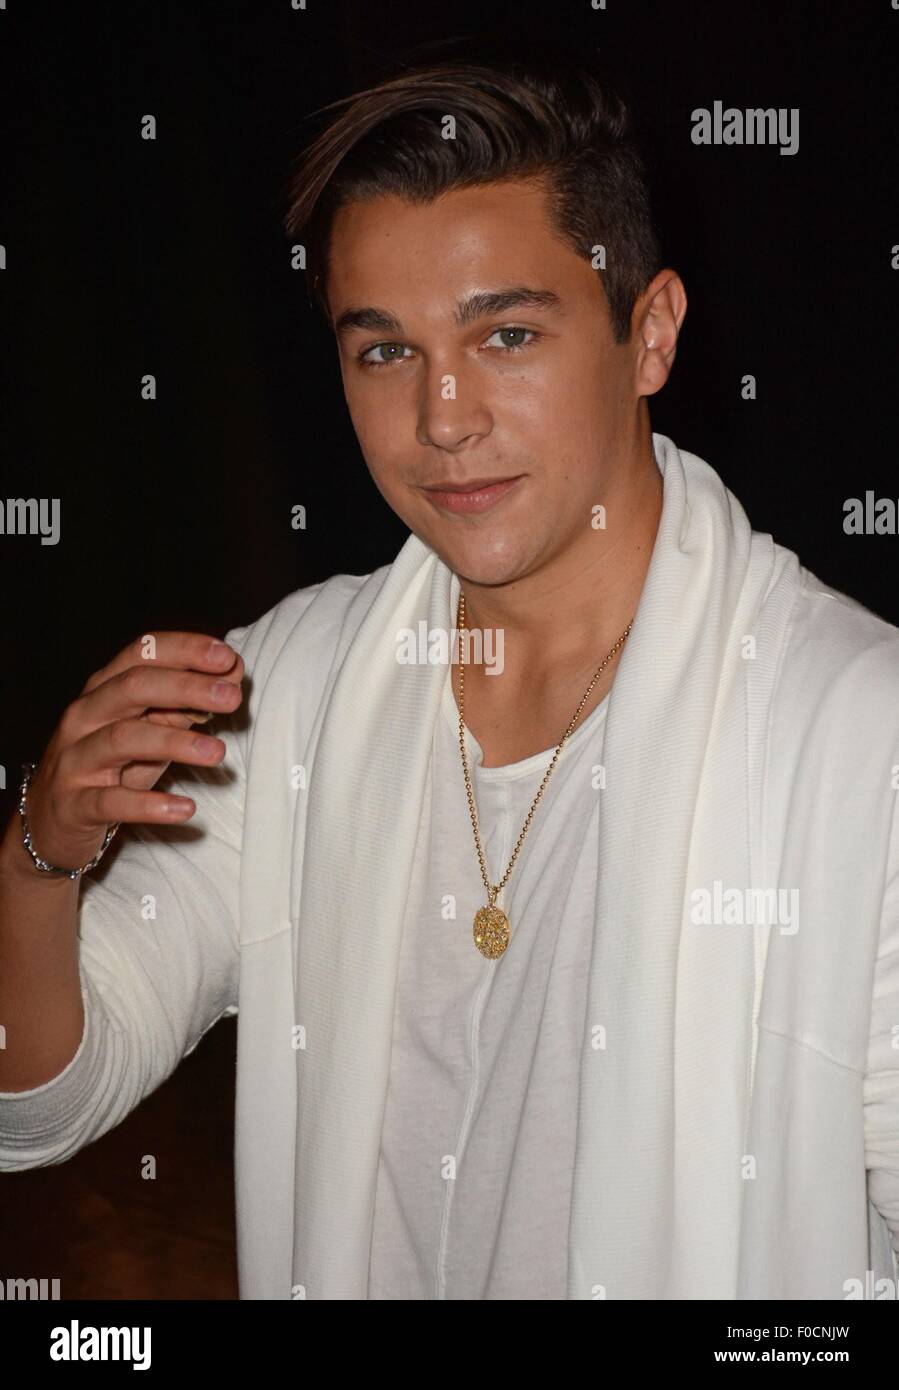 Austin Mahone at a public appearance for Austin Mahone Wax Figure Unveiling at Madame Tussauds, Madame Tussauds New York, New York, NY August 11, 2015. Photo By: Derek Storm/Everett Collection Stock Photo